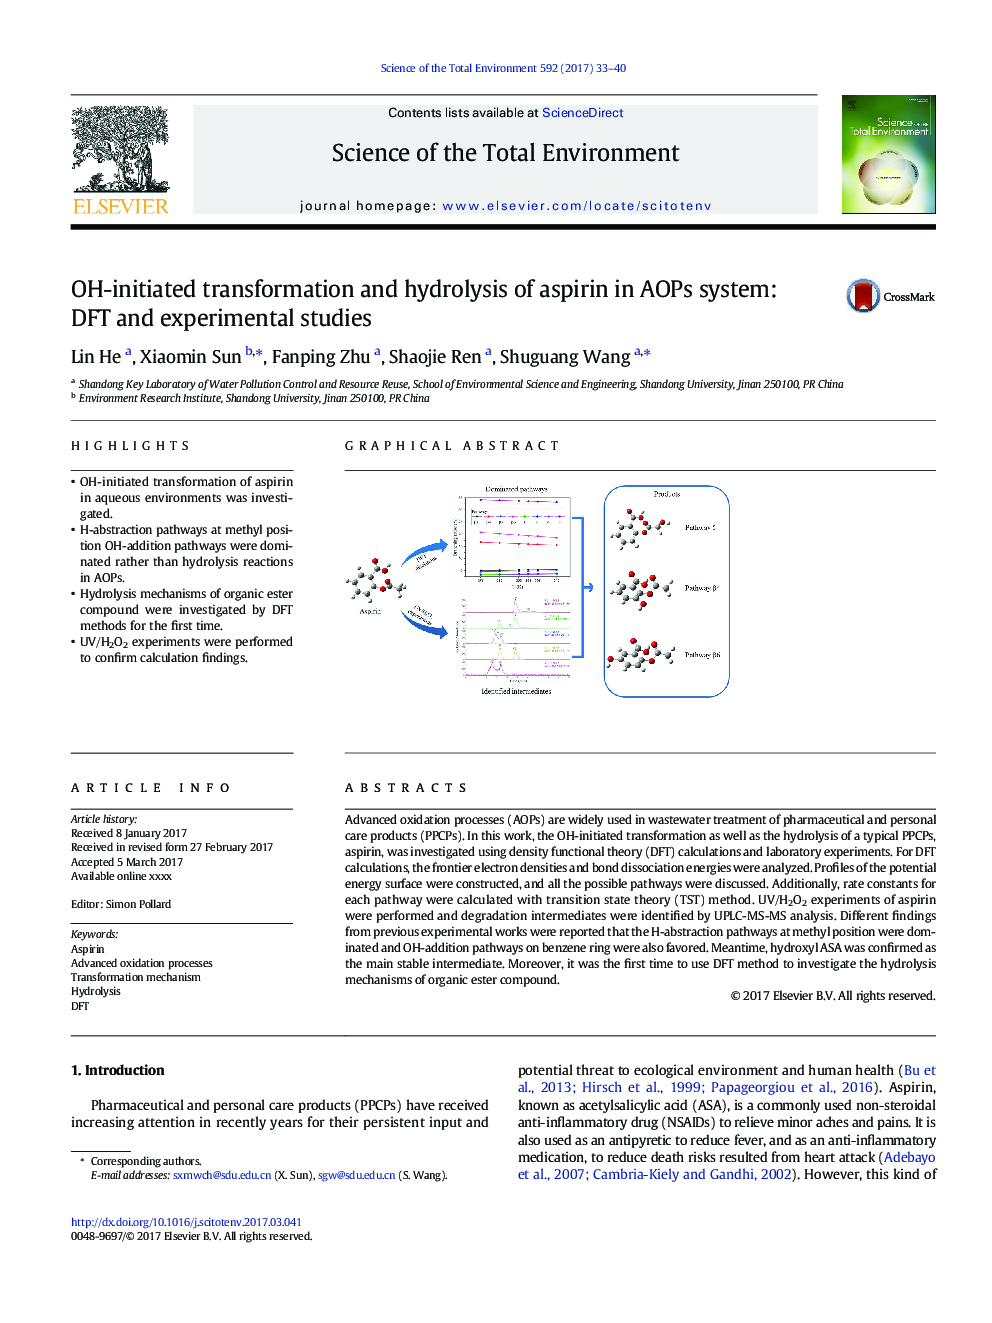 OH-initiated transformation and hydrolysis of aspirin in AOPs system: DFT and experimental studies